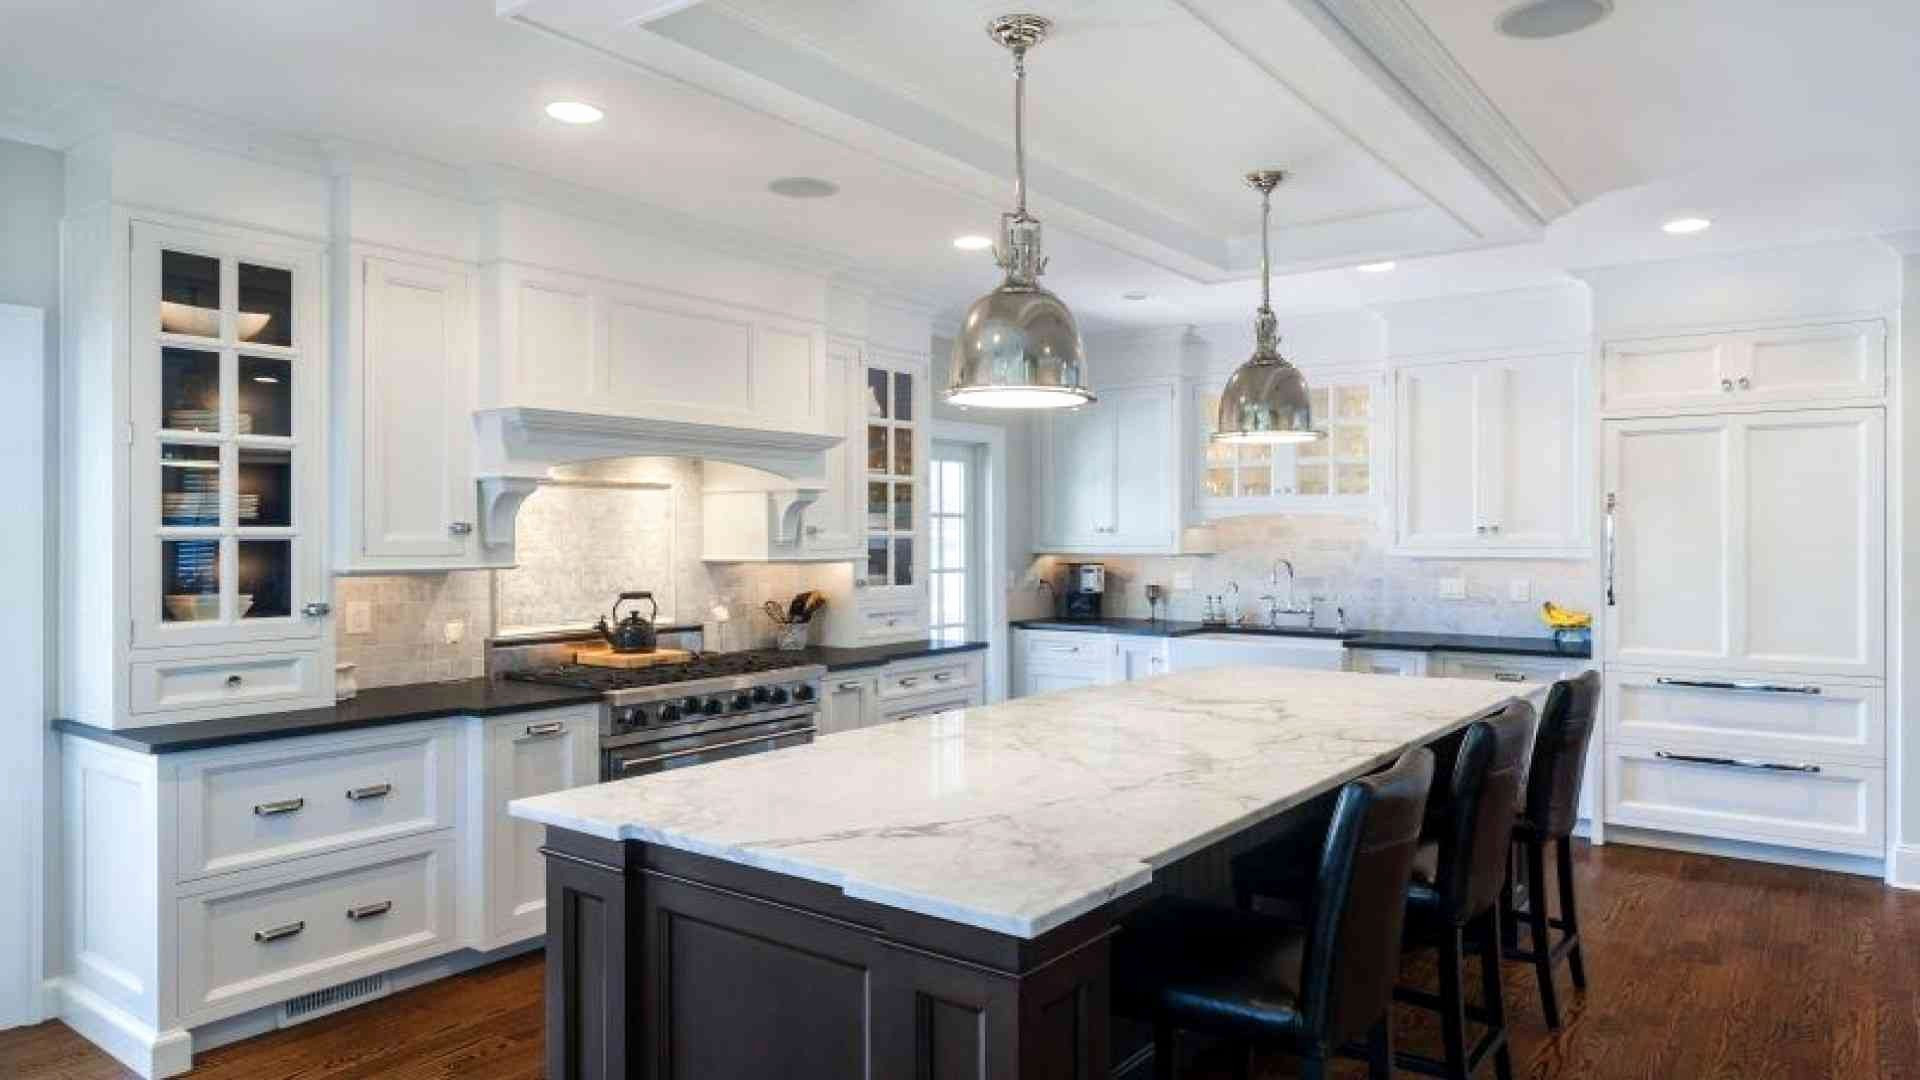 25 Awesome White Kitchen with Grey Hardwood Floors 2024 free download white kitchen with grey hardwood floors of 25 inspirational white kitchen cabinets photos kitchen cabinet with gorgeous white kitchens fresh kitchens with white cabinets unique kitchen cabin